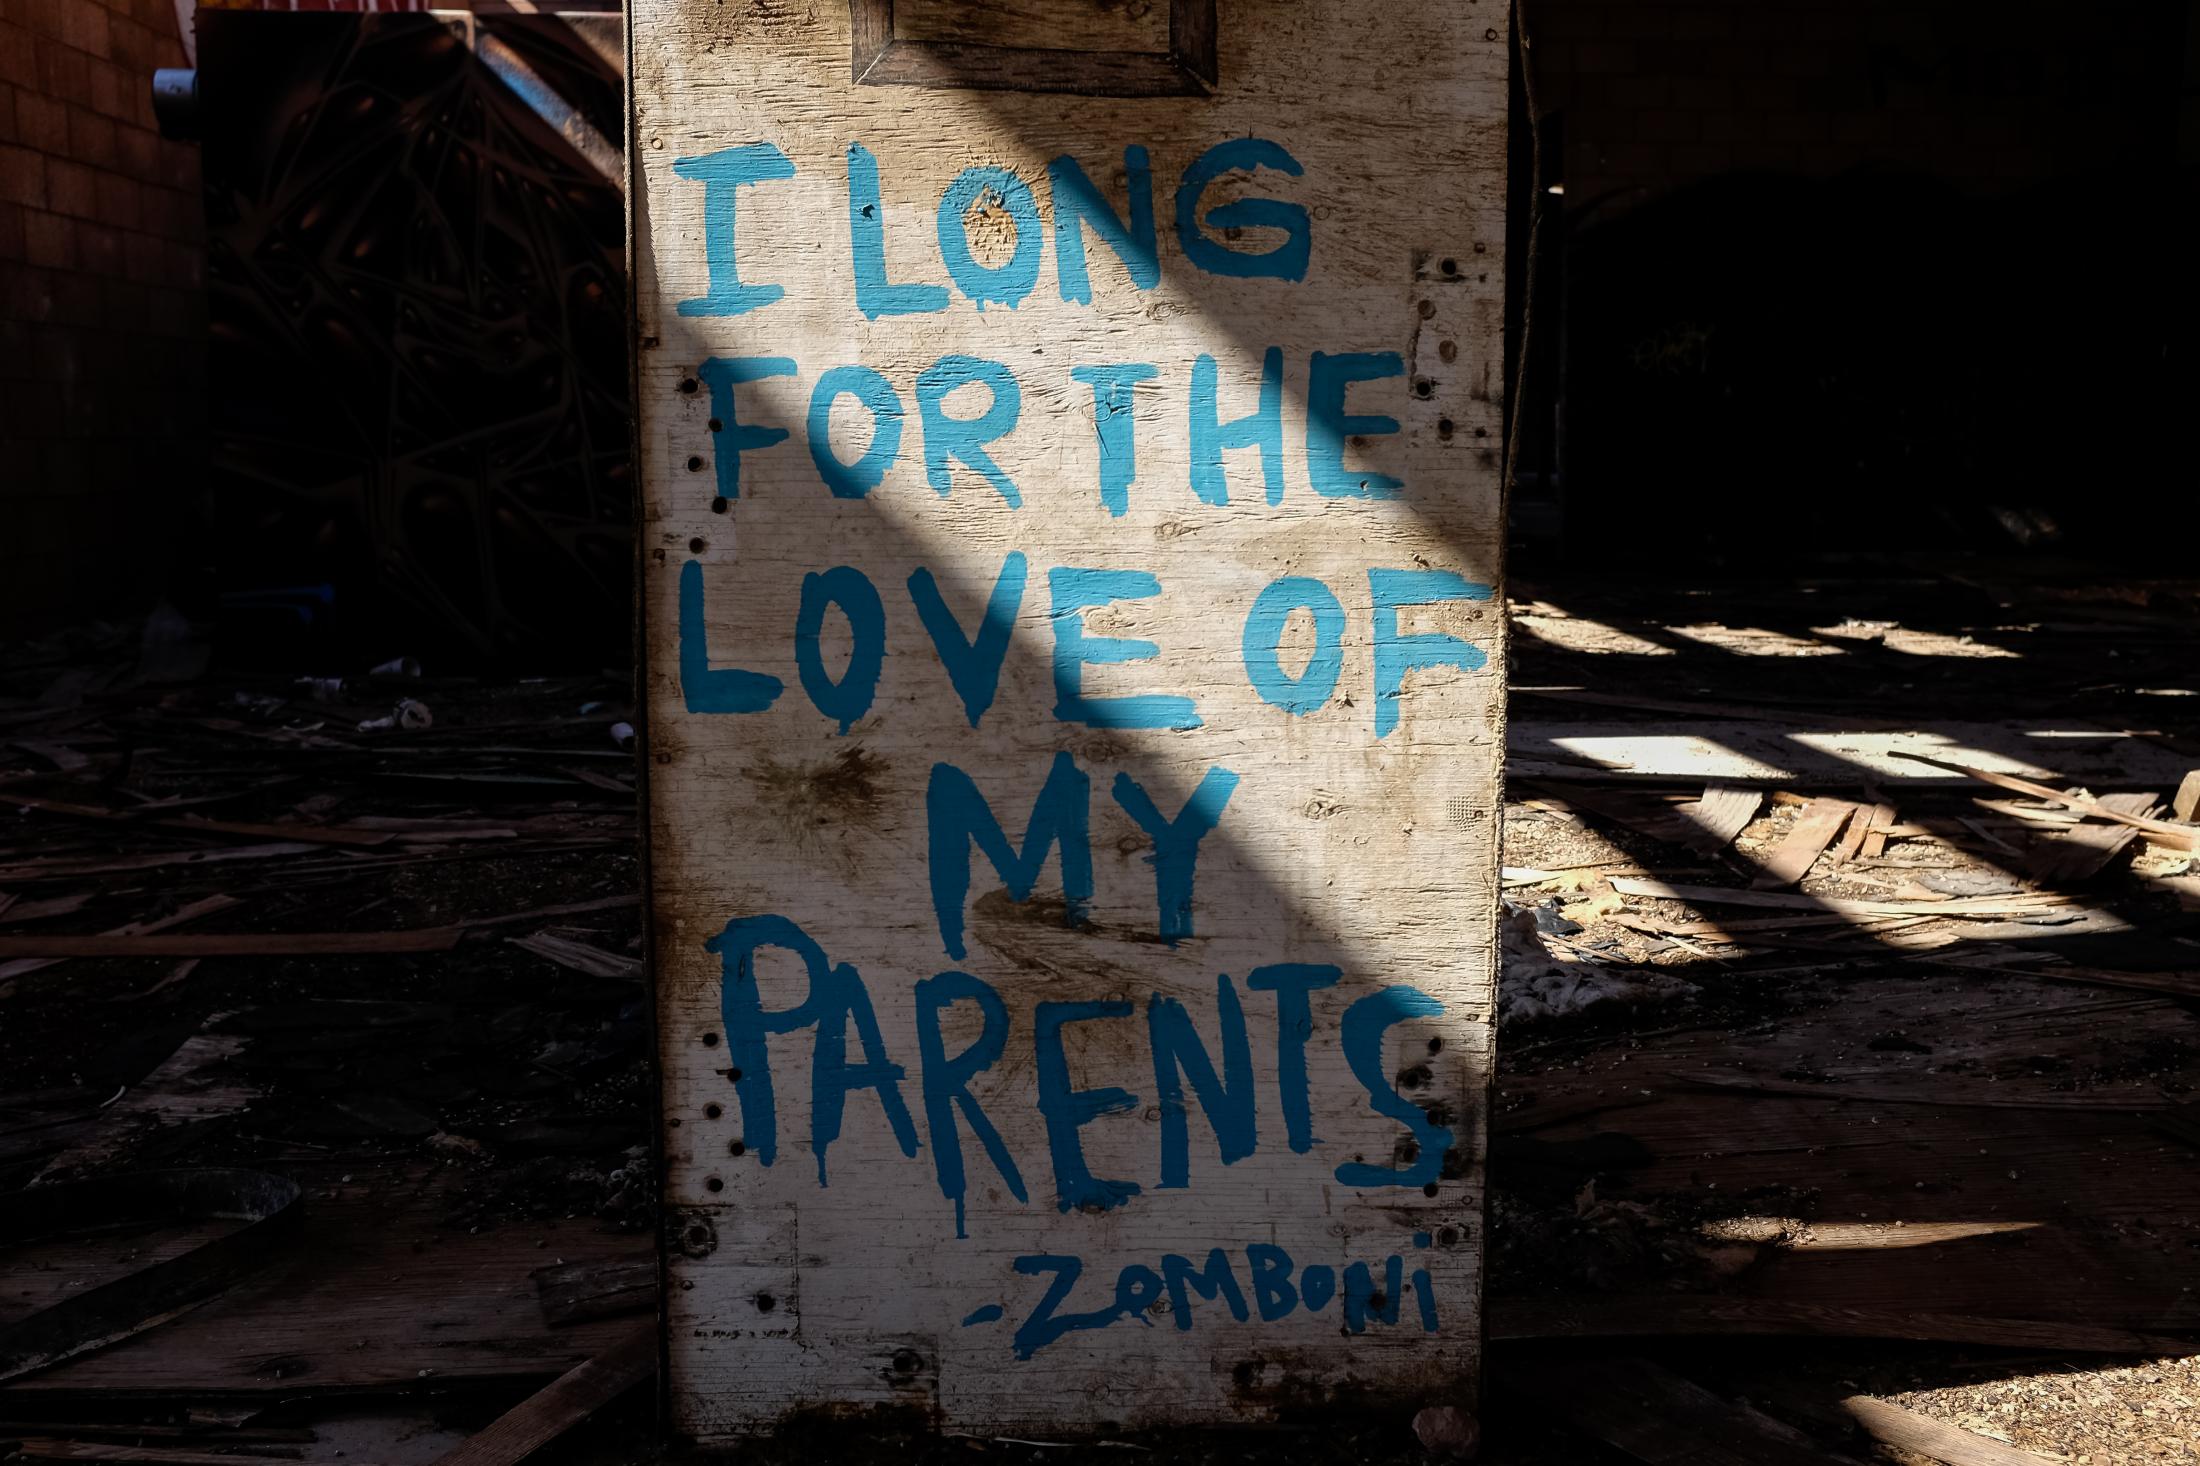 Graffiti that has been left behind on a concrete pillar, expresses pain from the past. Many...